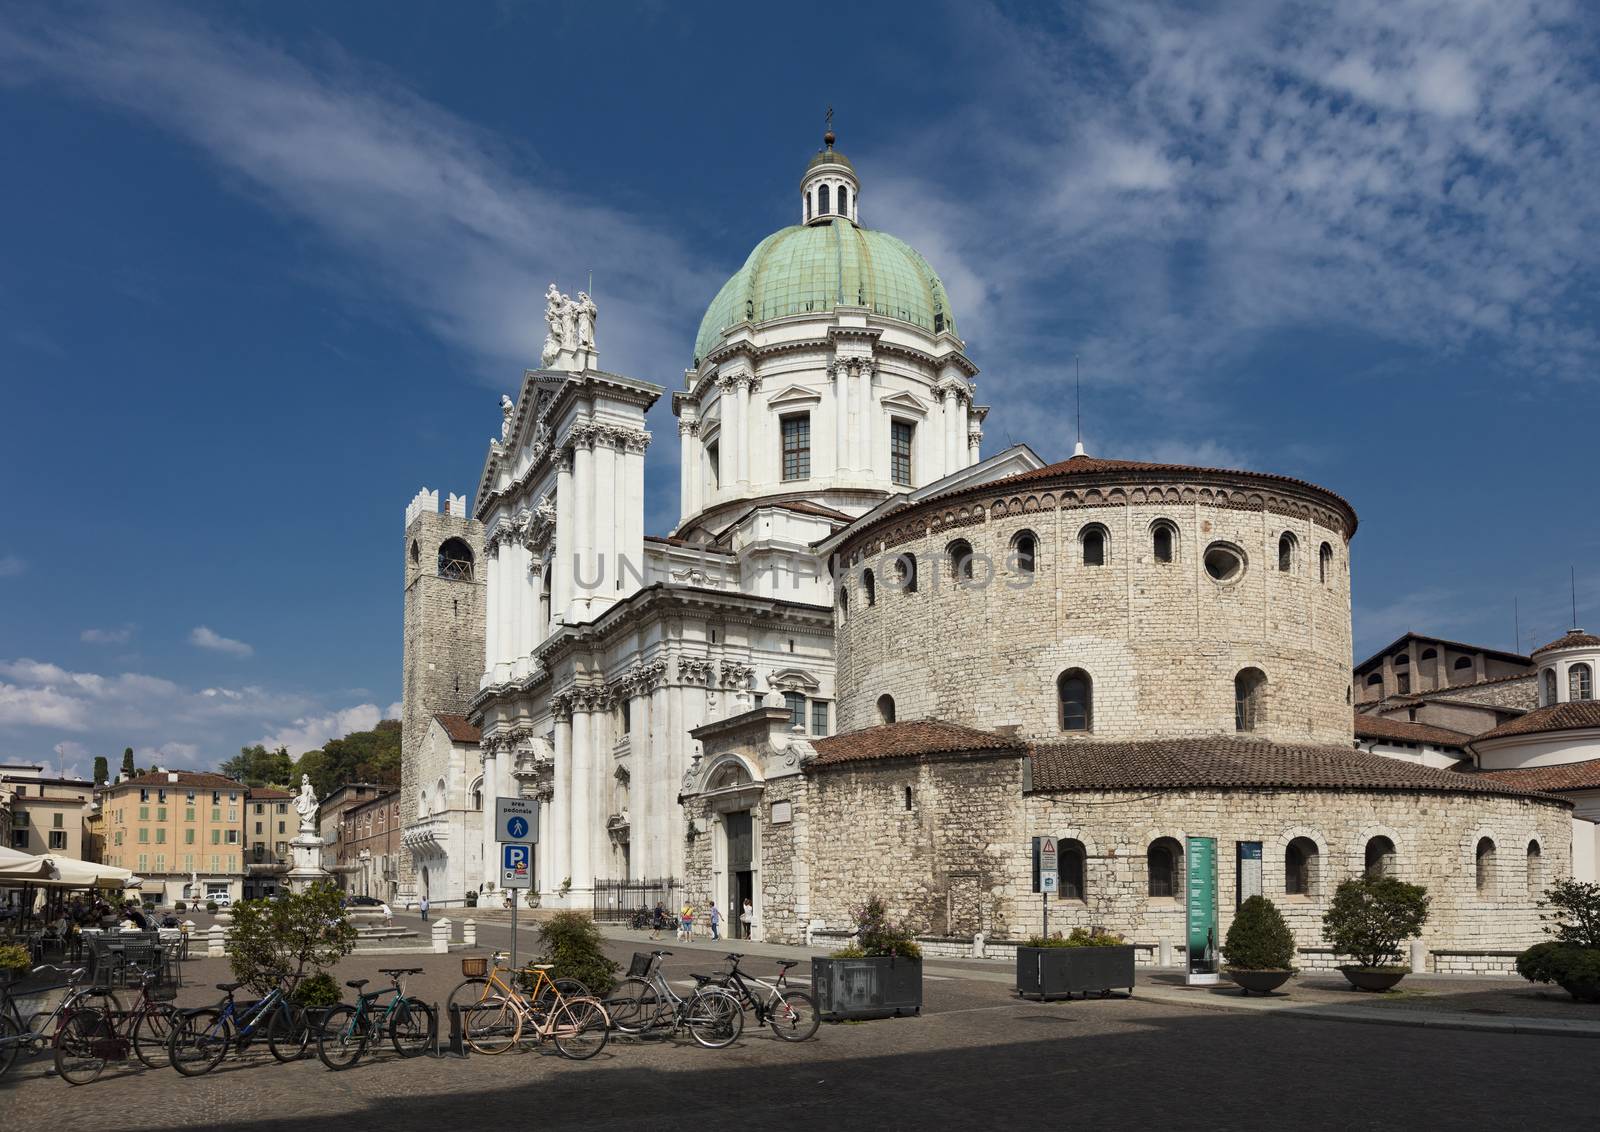 Brescia, Italy, Europe, August 2019, A view of the Old and New Cathedral, the Duomo Vecchio and Duomo Nuovo